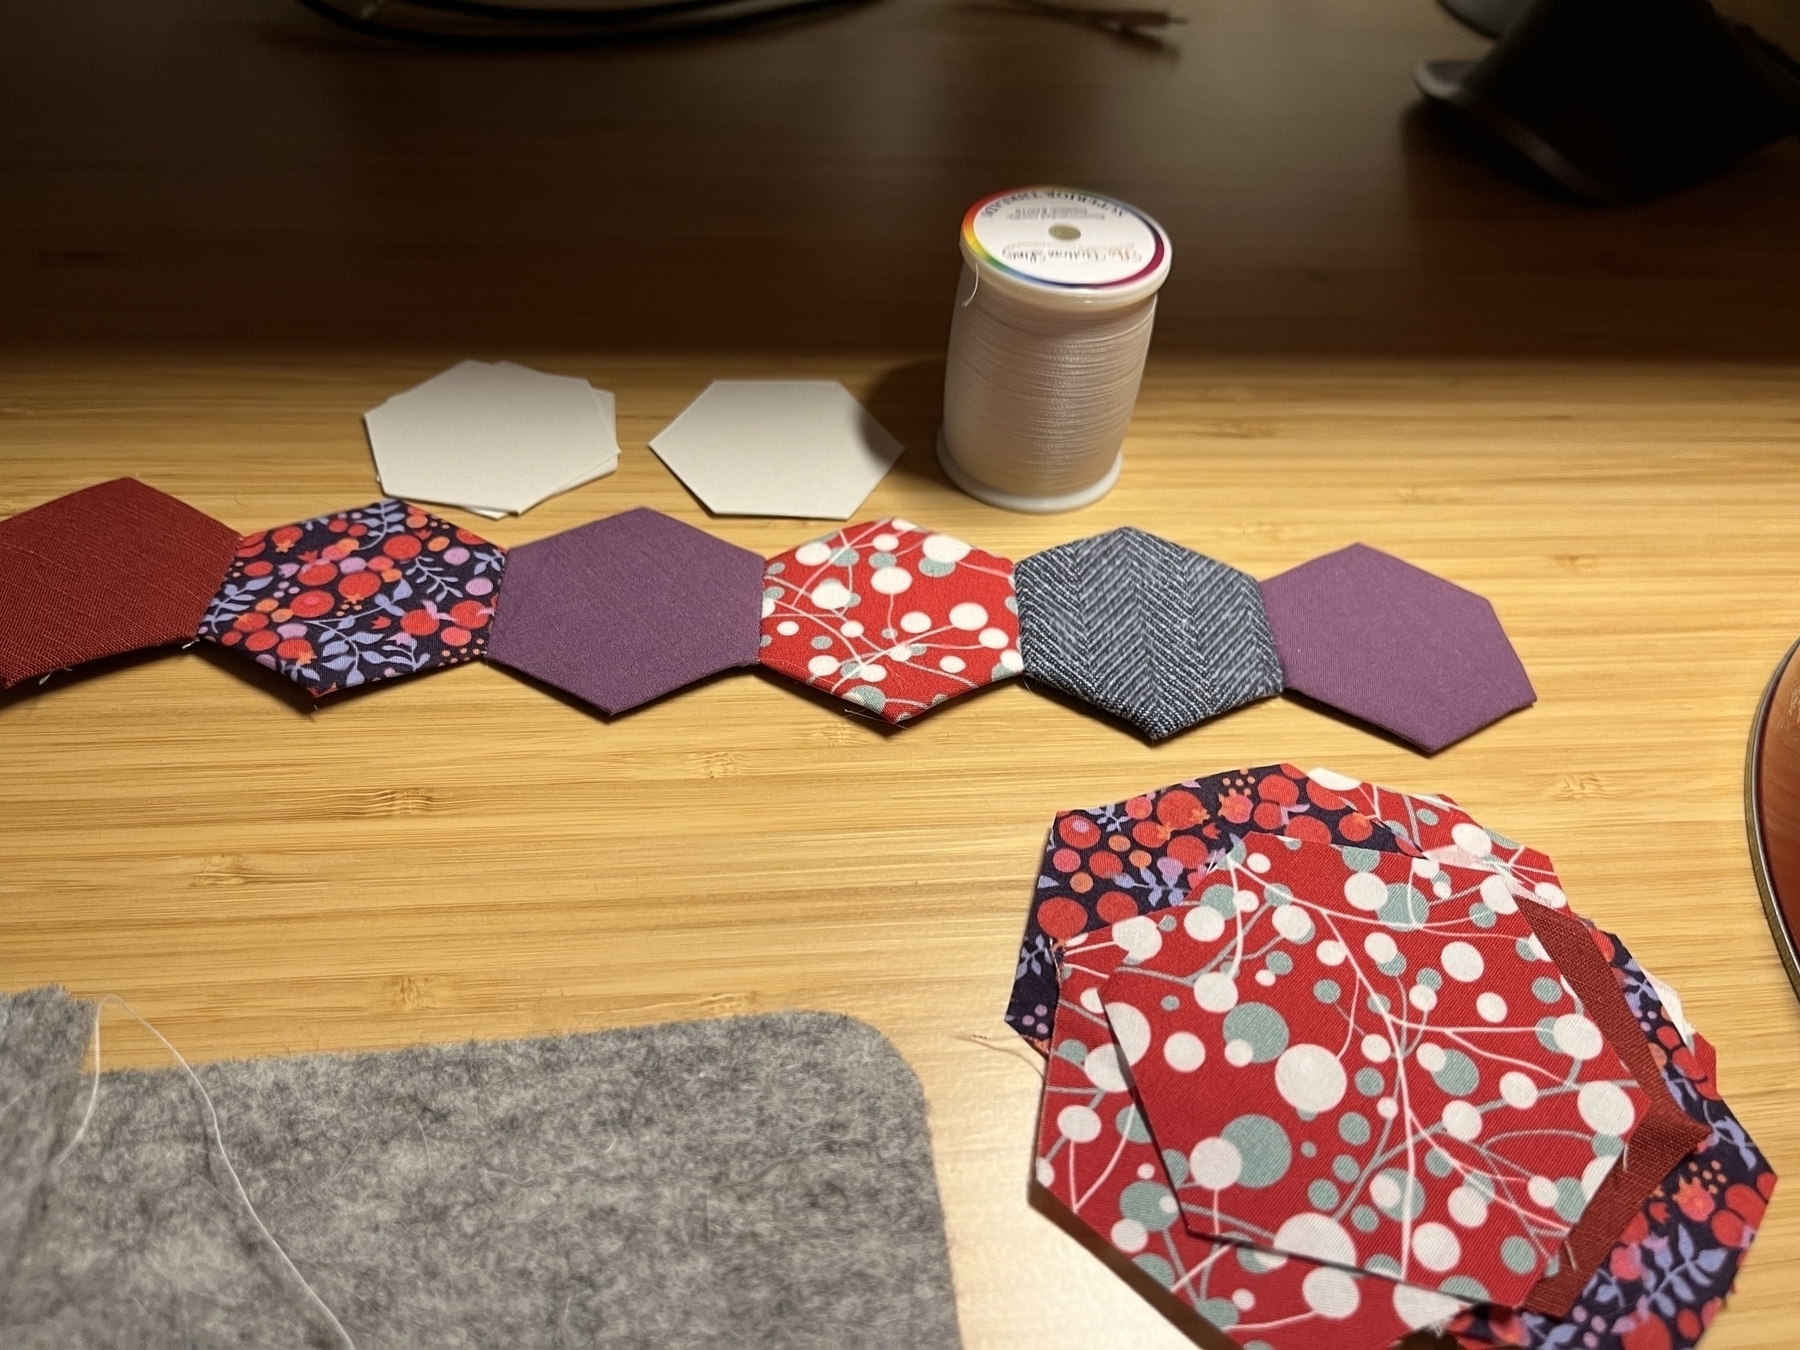 A row of fabric hexagons sewn together in shades of red, purple and blue. 